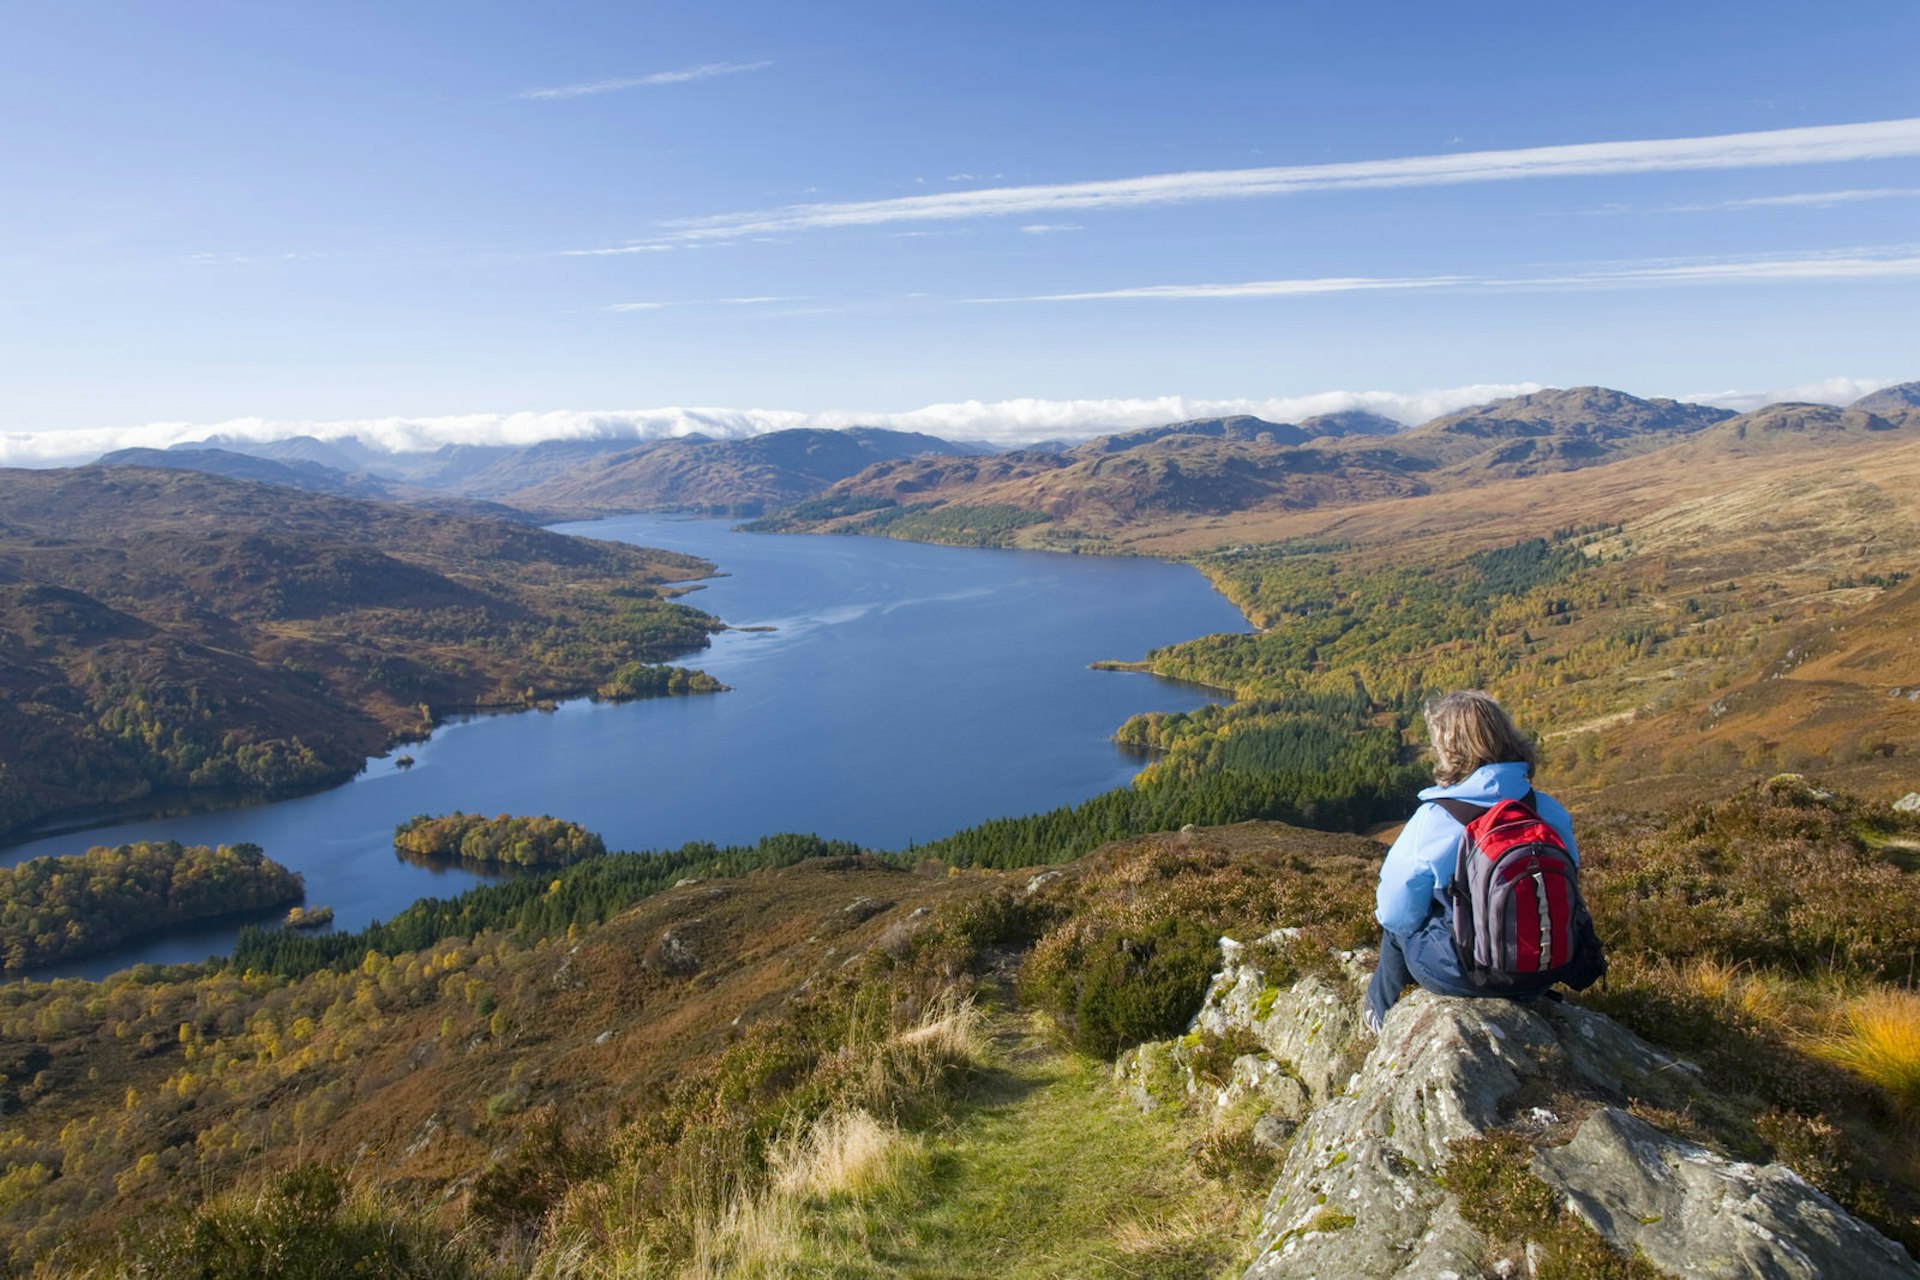 Great lakes – Loch Katrine, as seen seen from the Trossachs, Scotland